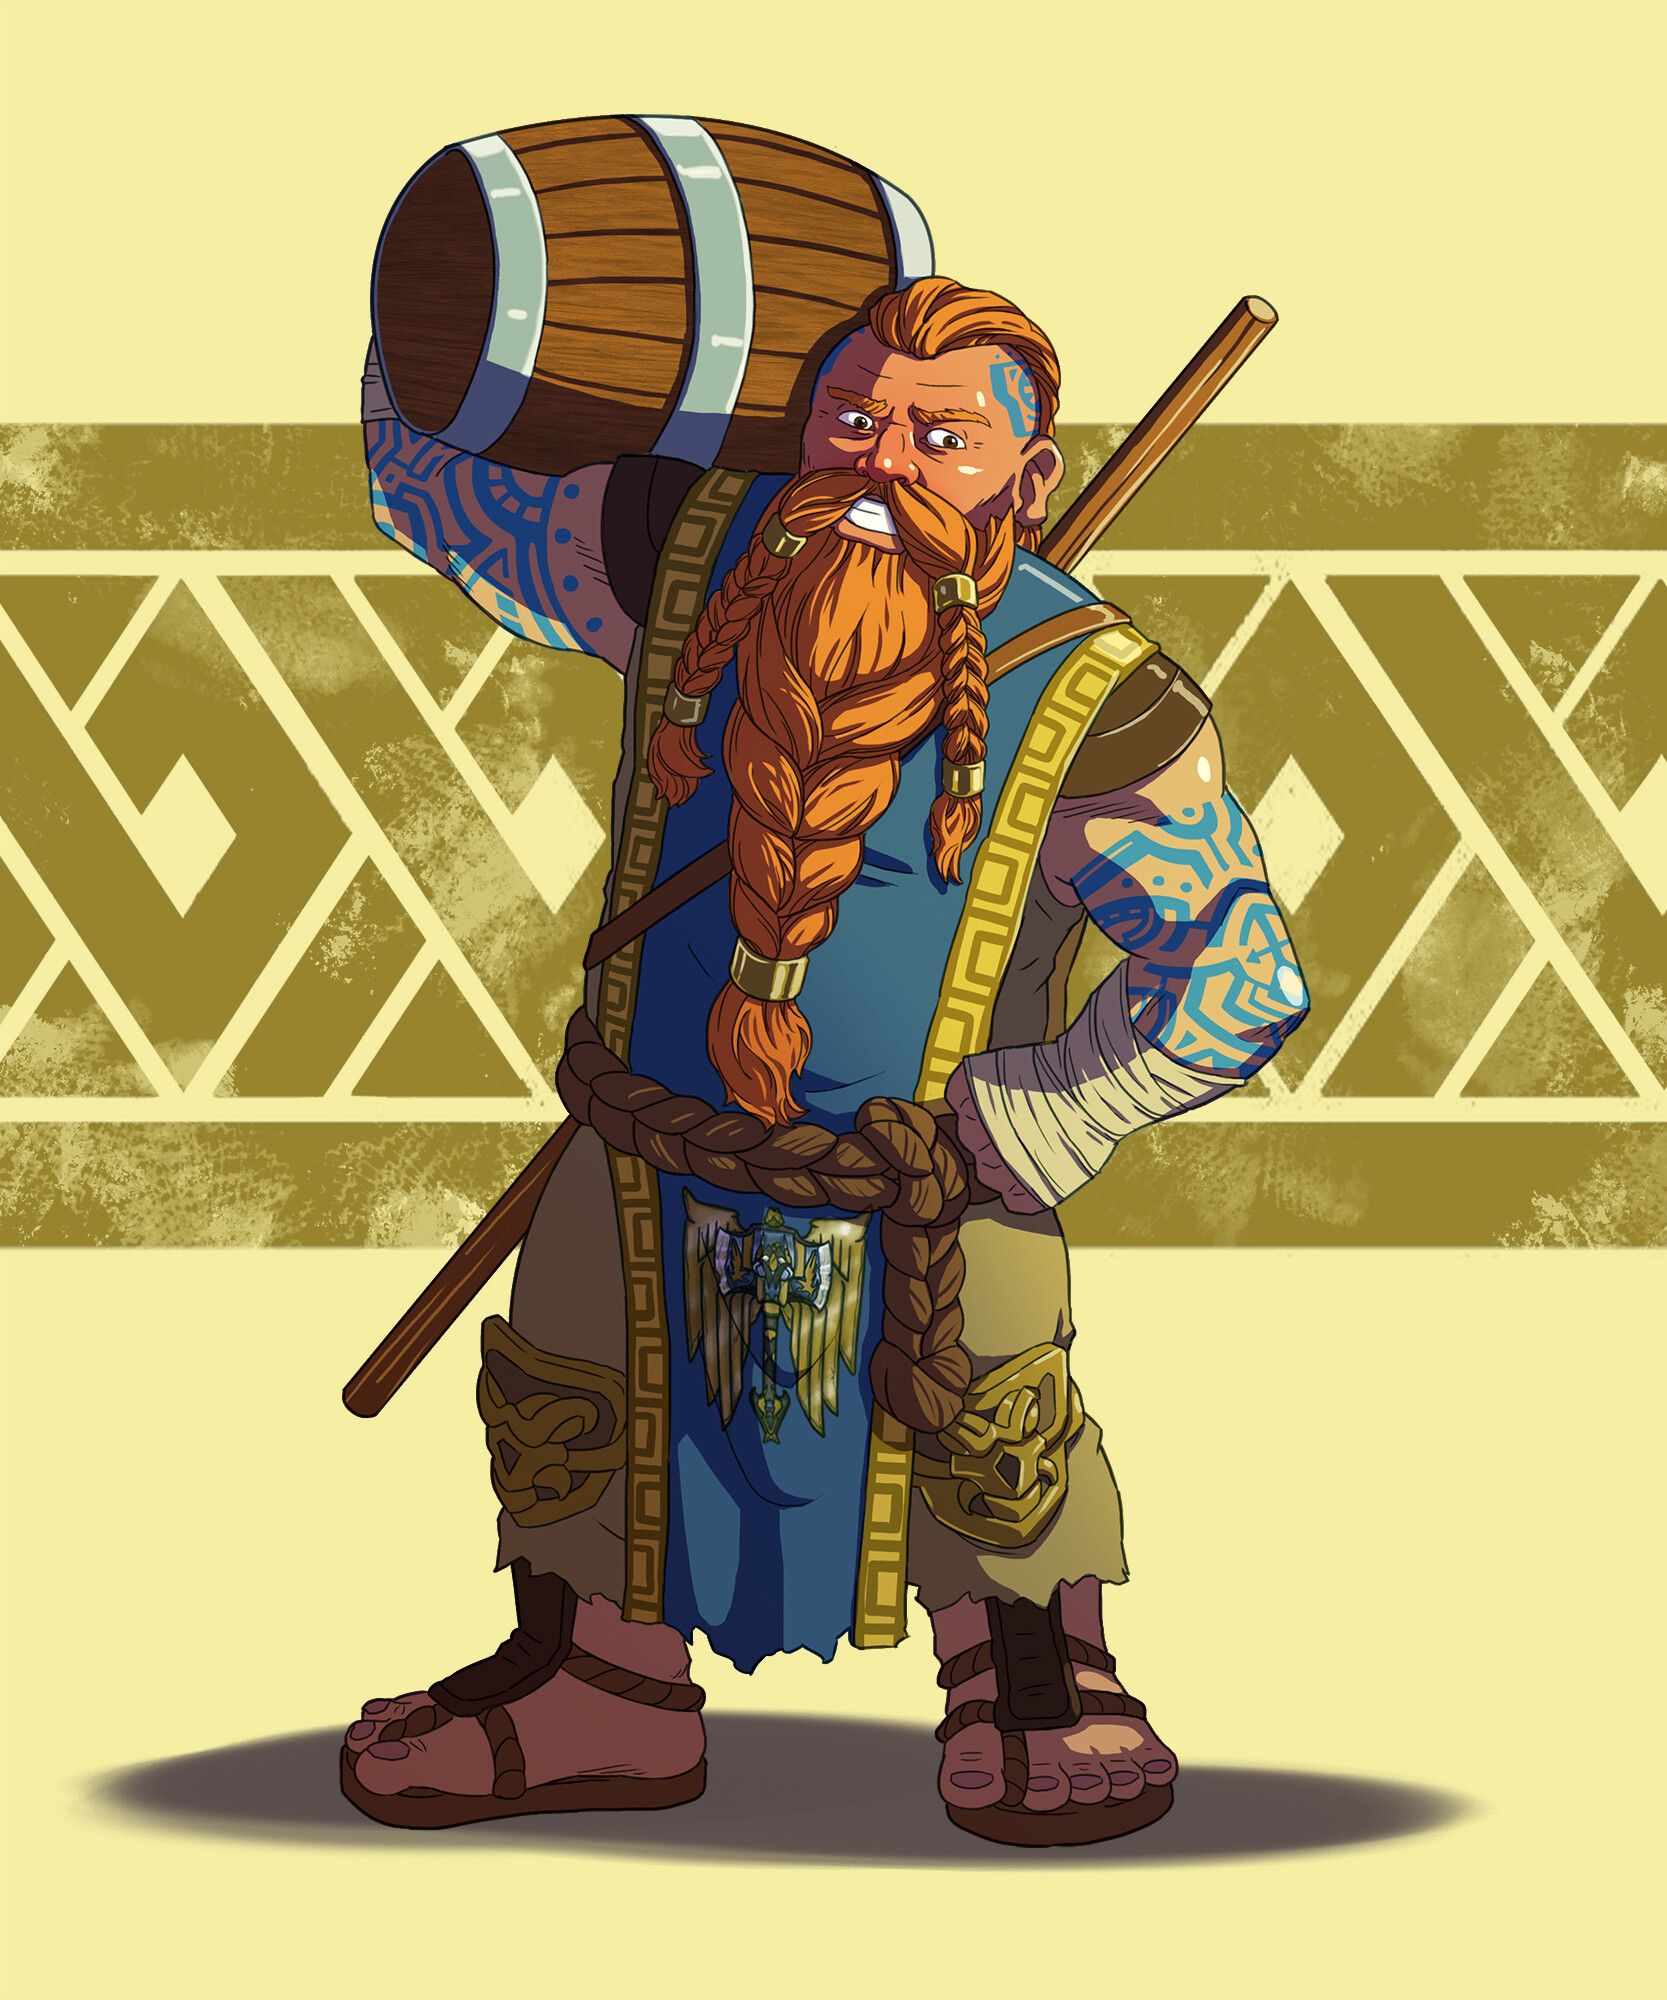 commissioned art for Travin Schmidt of his jolly drunk DnD Dwarf monk.